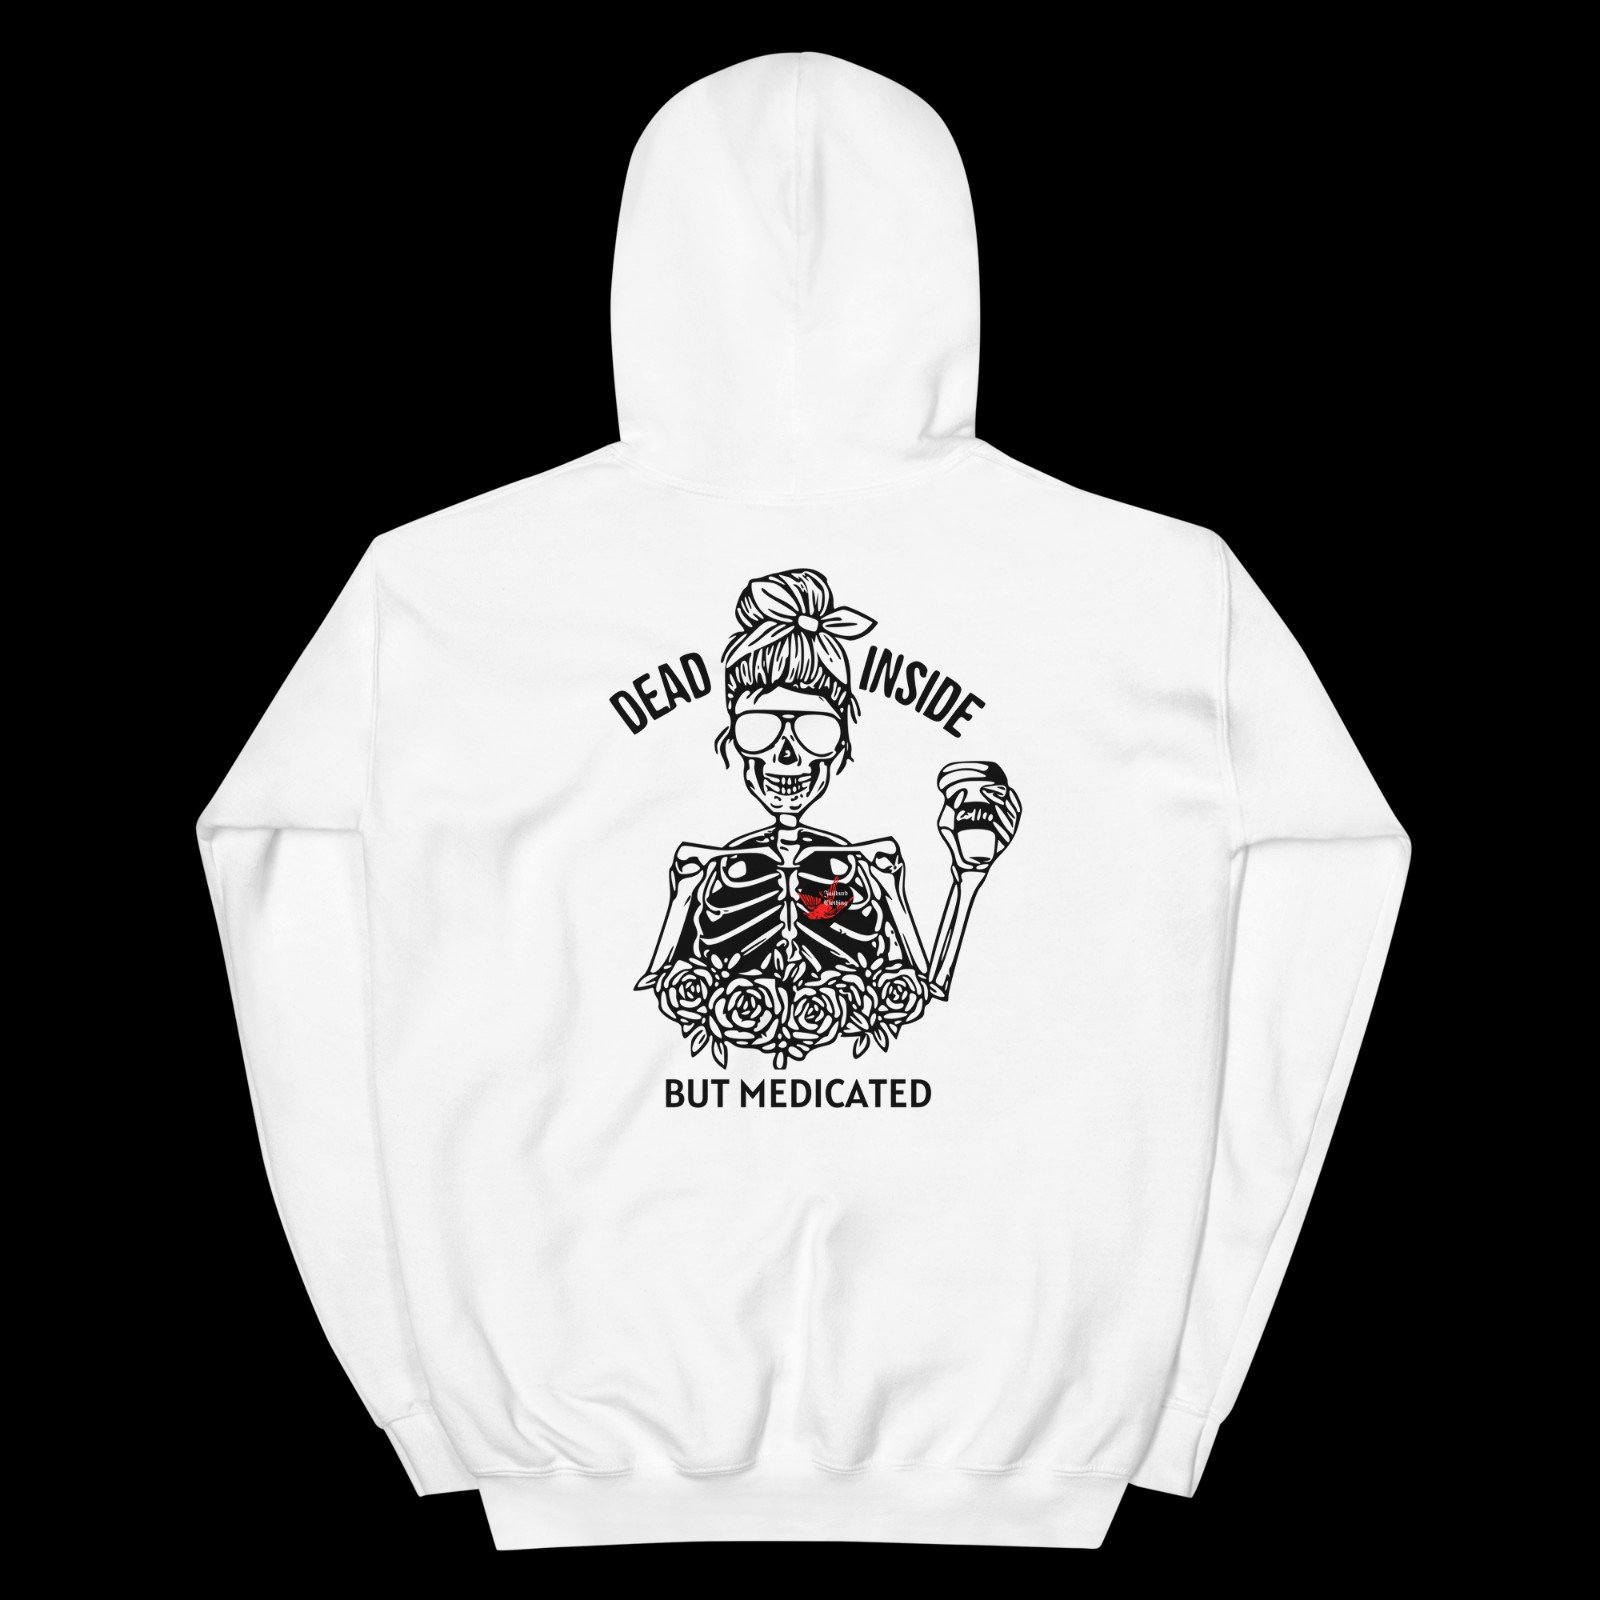 save up to 70% Dead but medicated hoodie pEkWZMpCB Grea